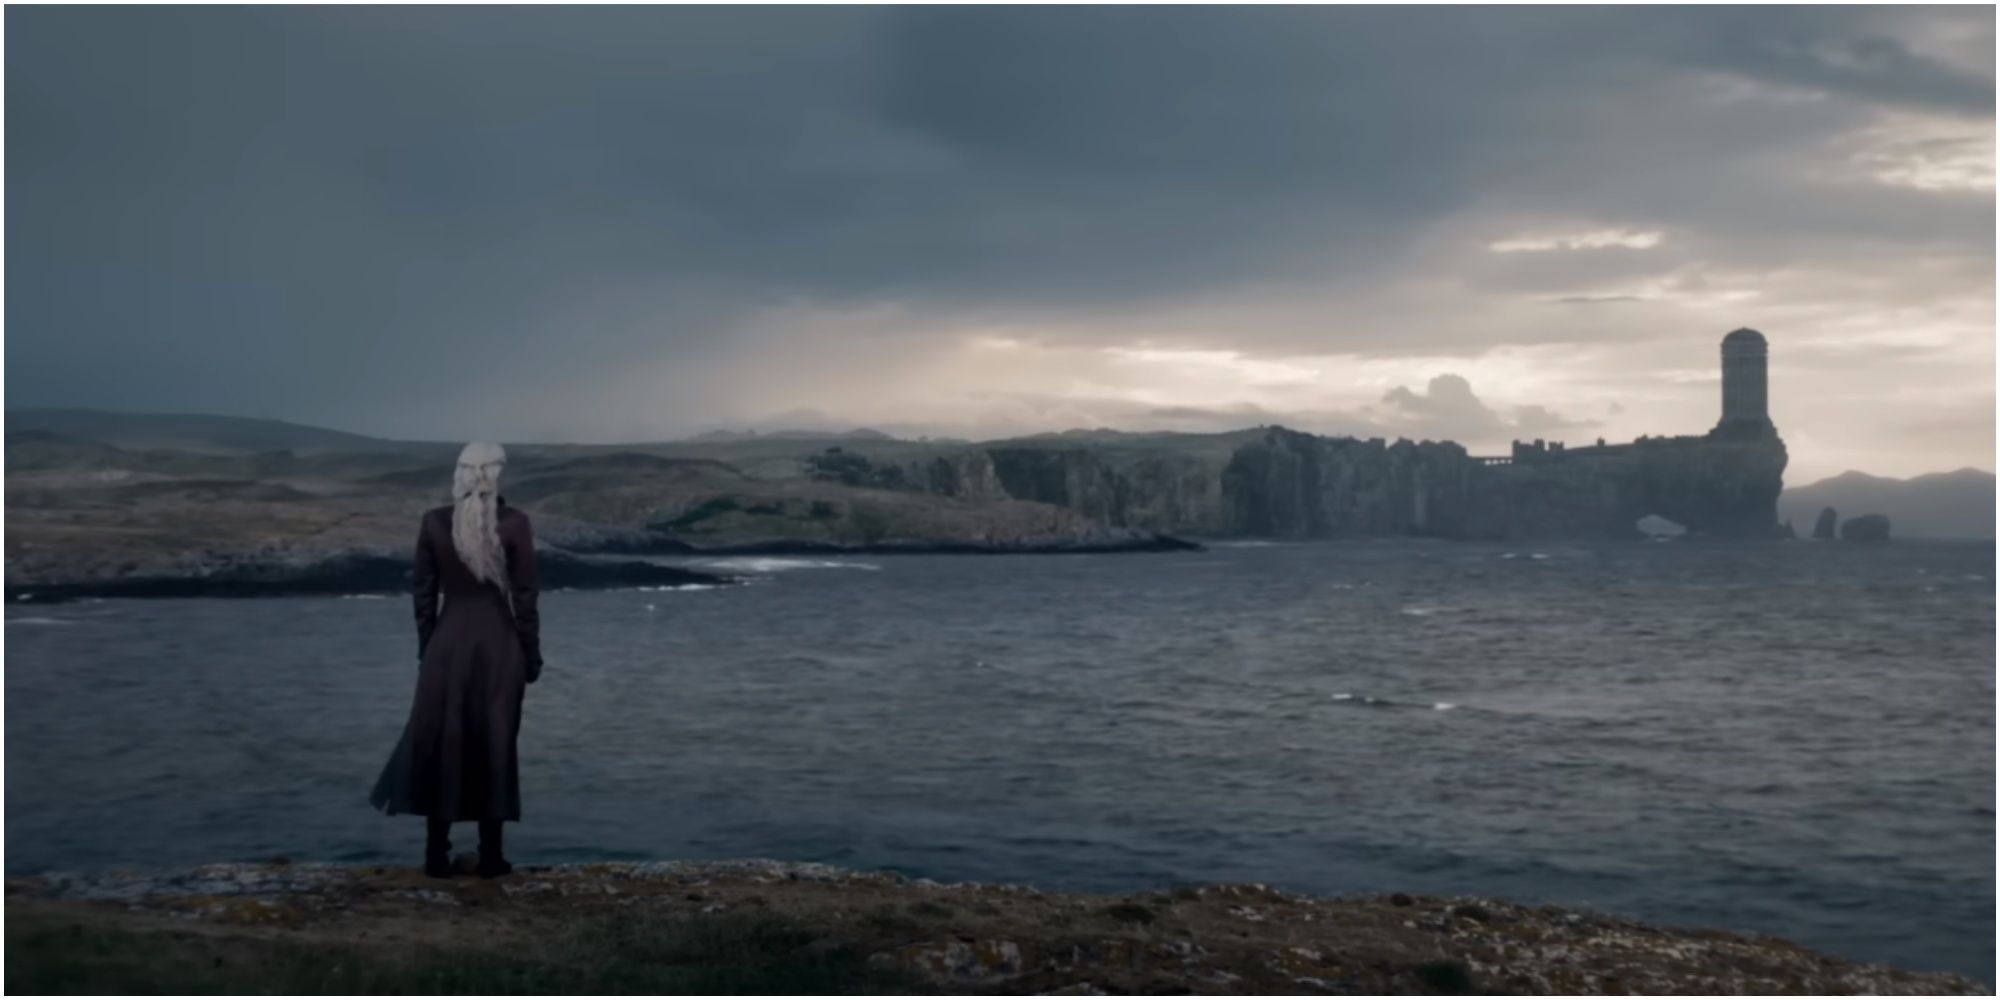 Rhaenyra looking at Storm's End castle in House of the Dragon Season 2 teaser trailer.